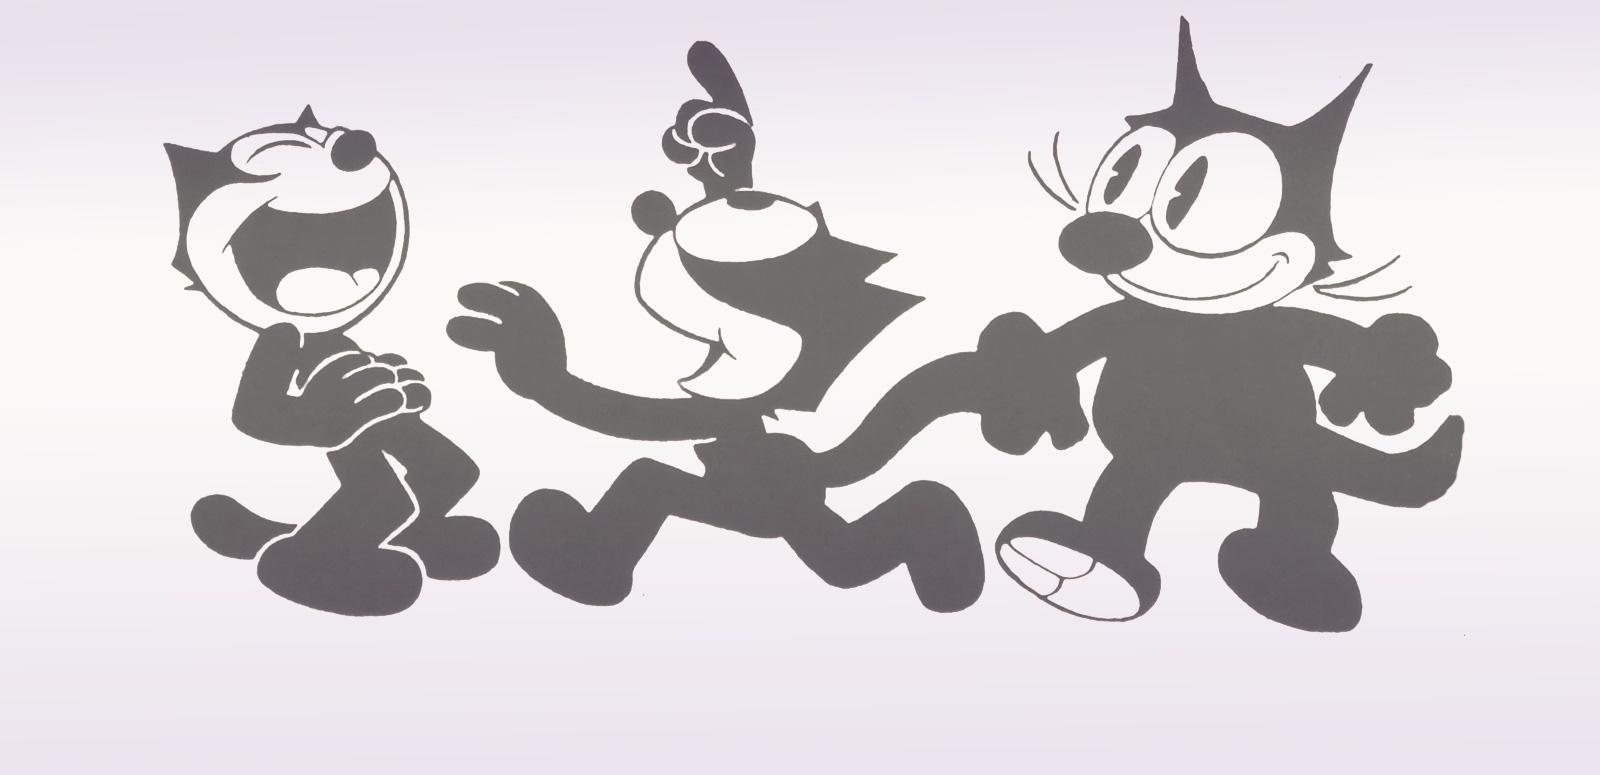 A set of three drawings of the cartoon character Felix the Cat in different poses.